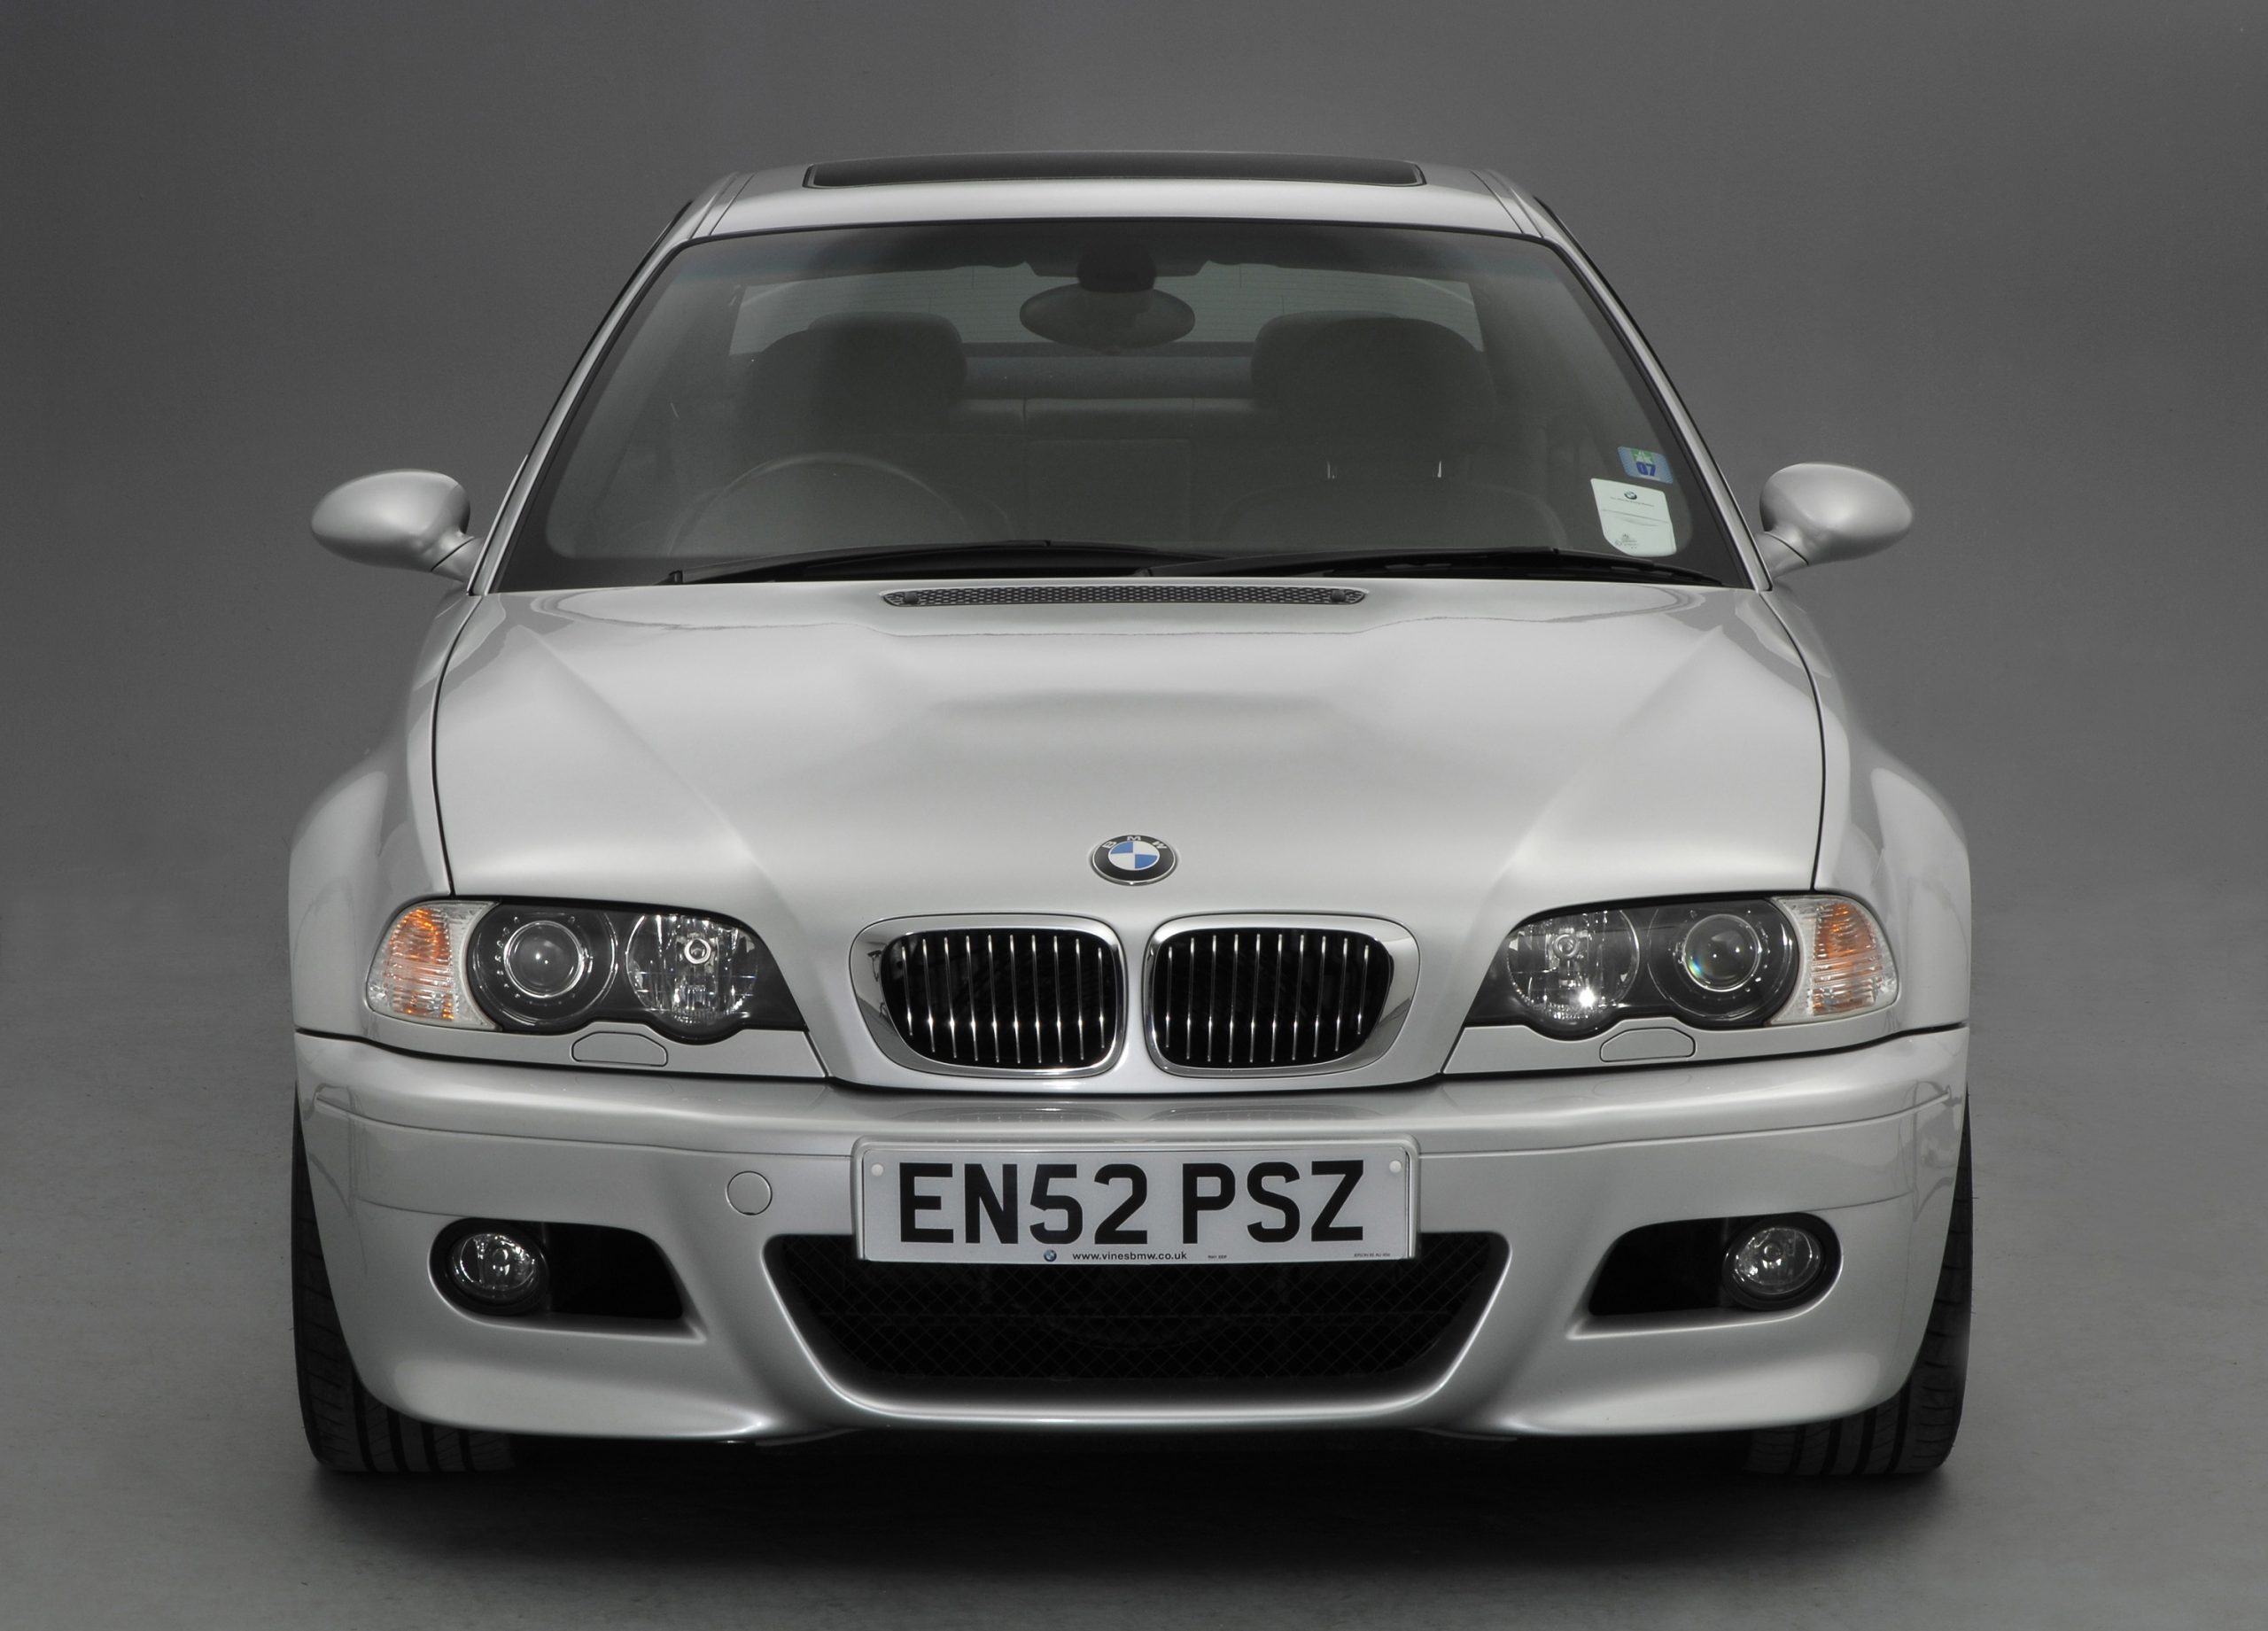 The front nose of a 2002 BMW M3 coupe